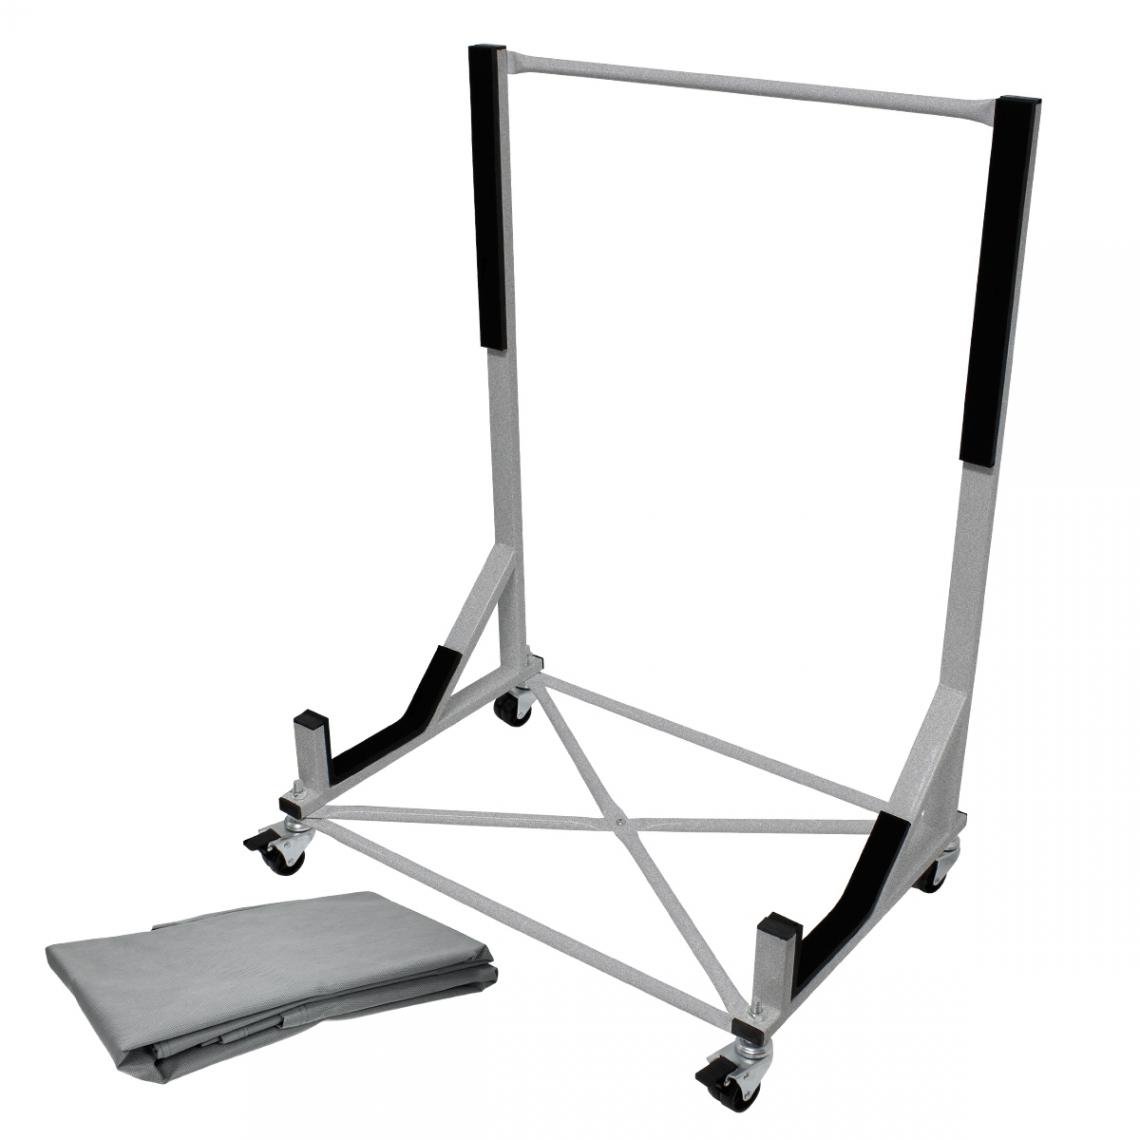 Ecd Germany - Chariot hardtop stand rigide support argent capote + housse XXL Mercedes Honda - Diable, chariot